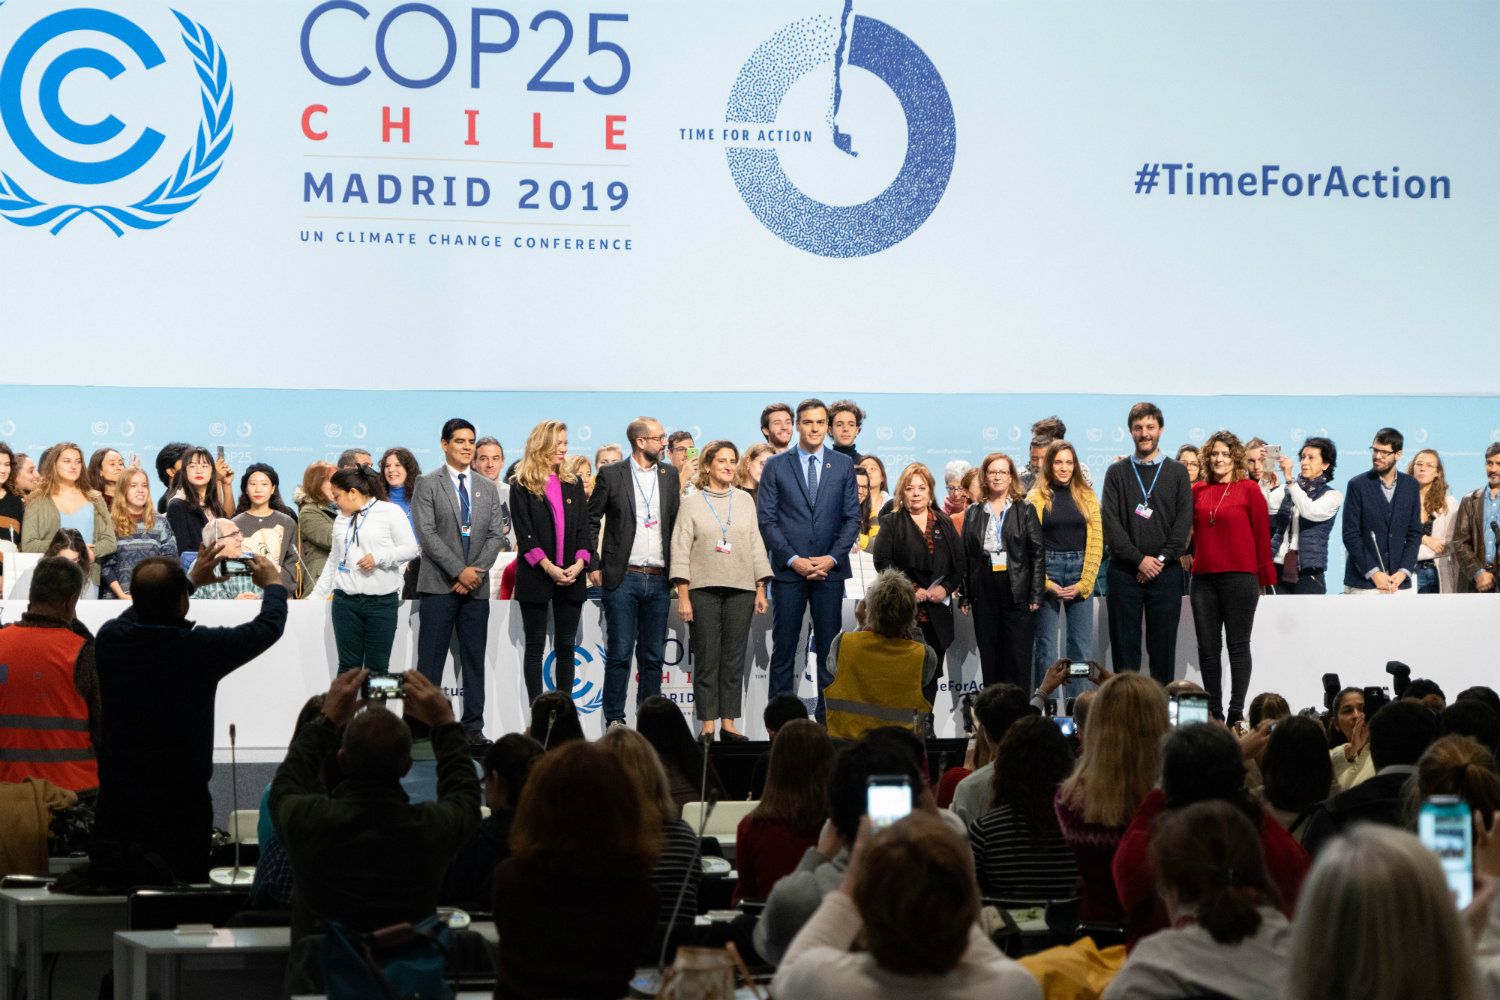 People attending award event COP 25